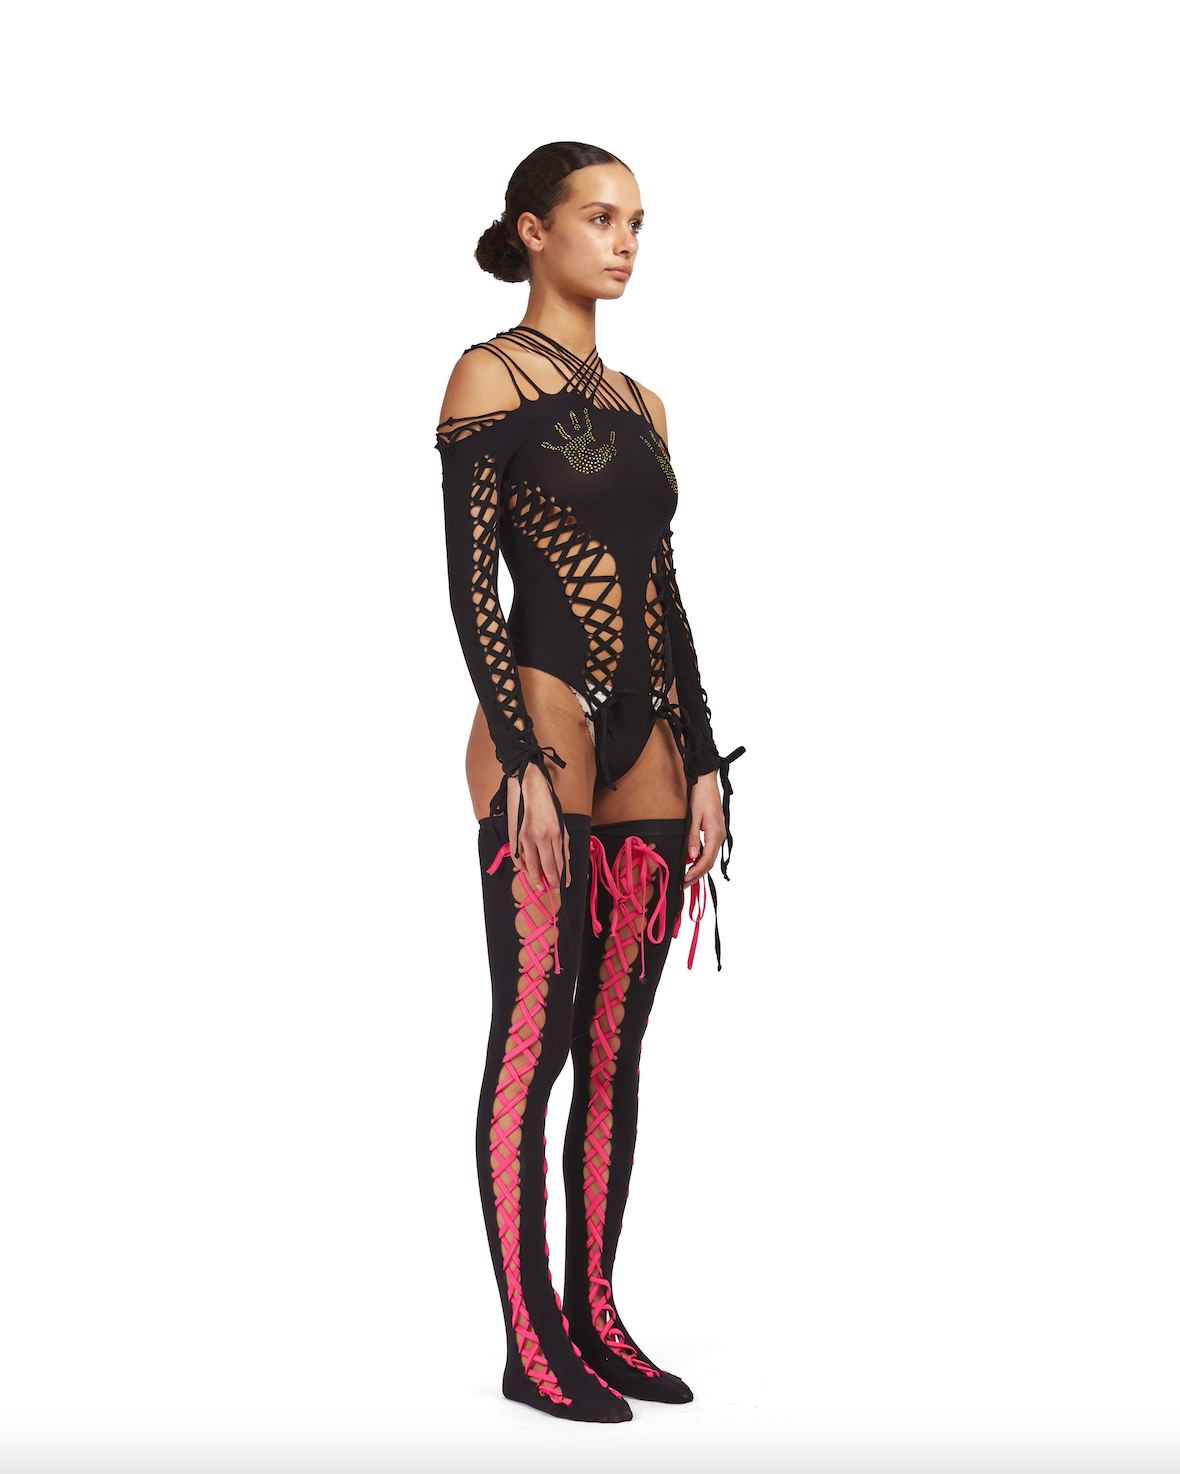 Seamless body-suit with lace up detailing and rhinestone hand-prints